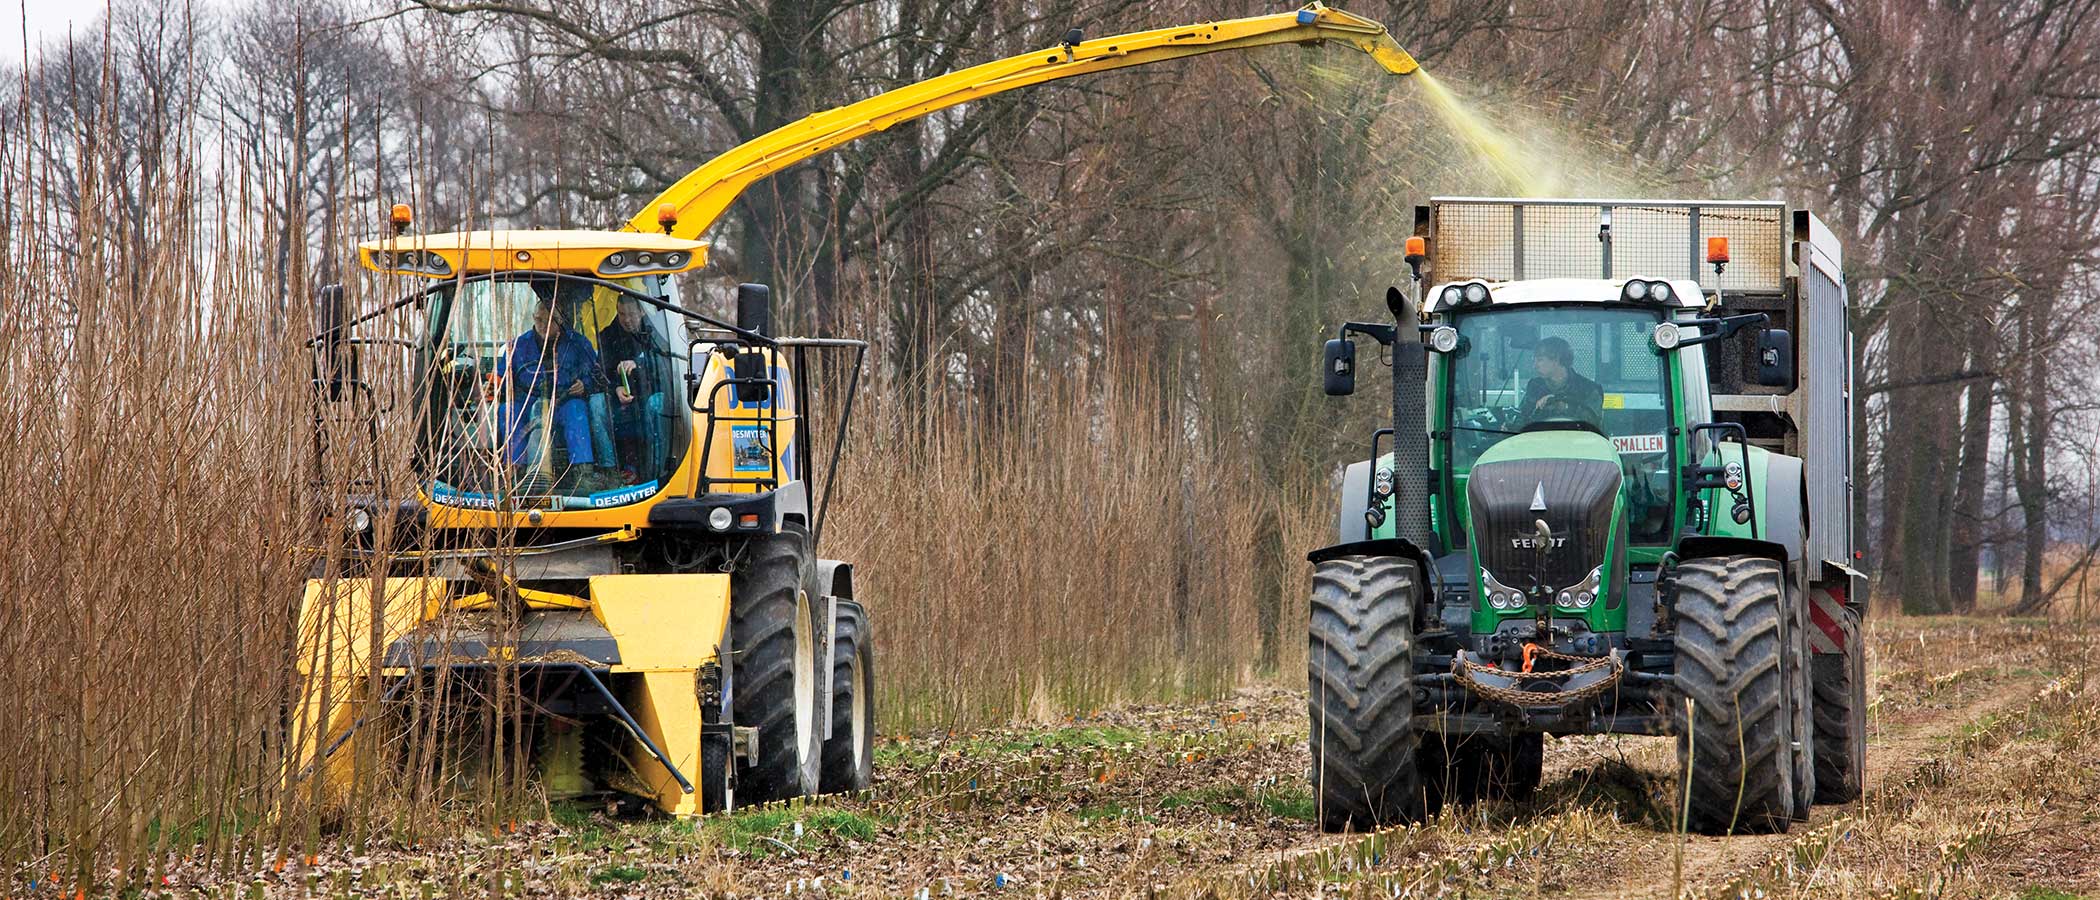 Tractor harvesting biomass in Germany.